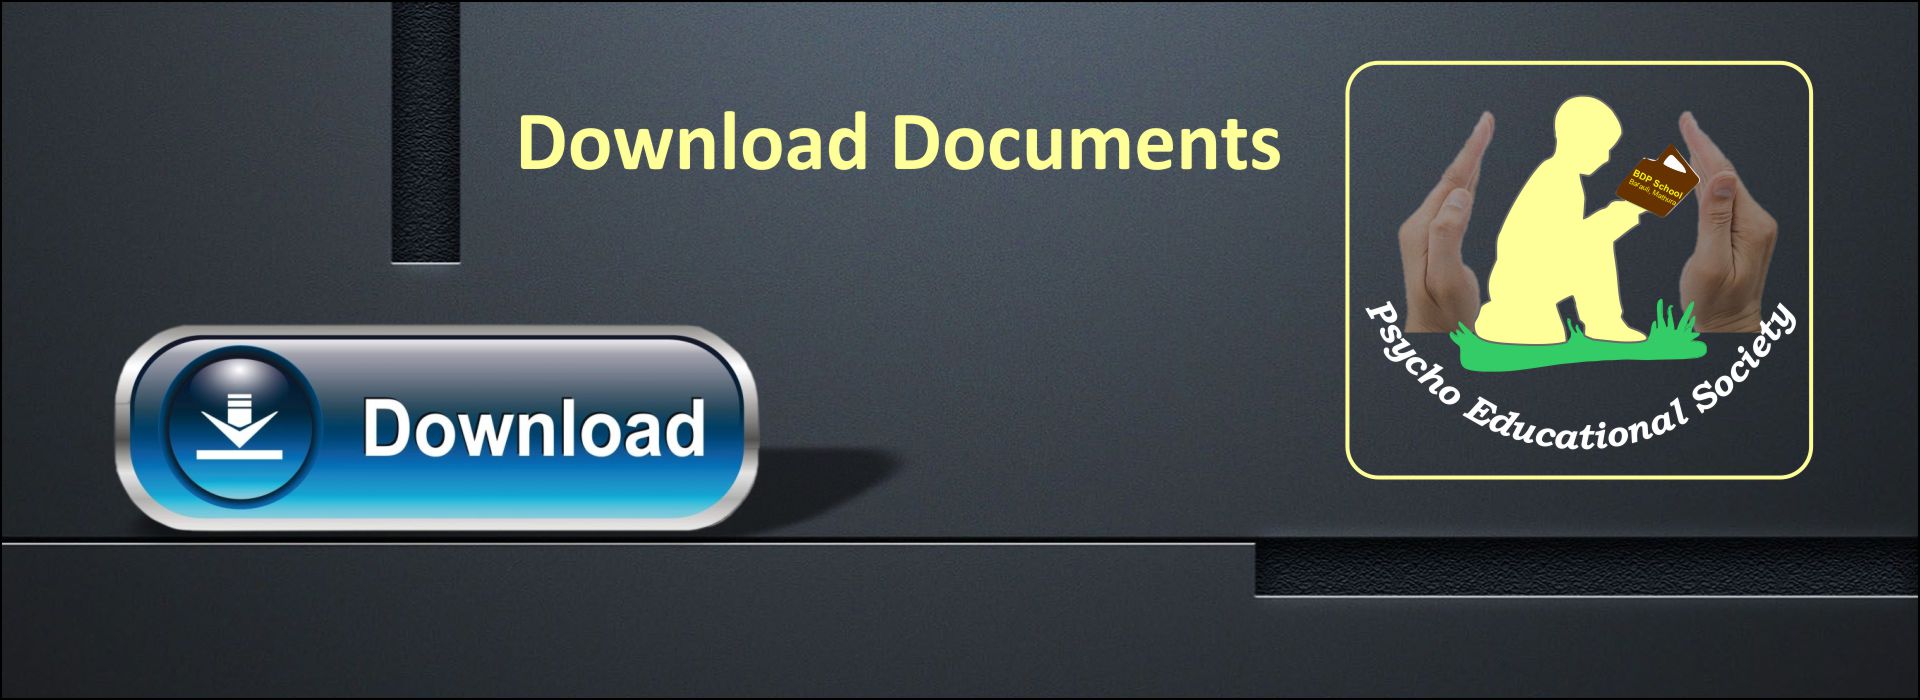 Download-Documents